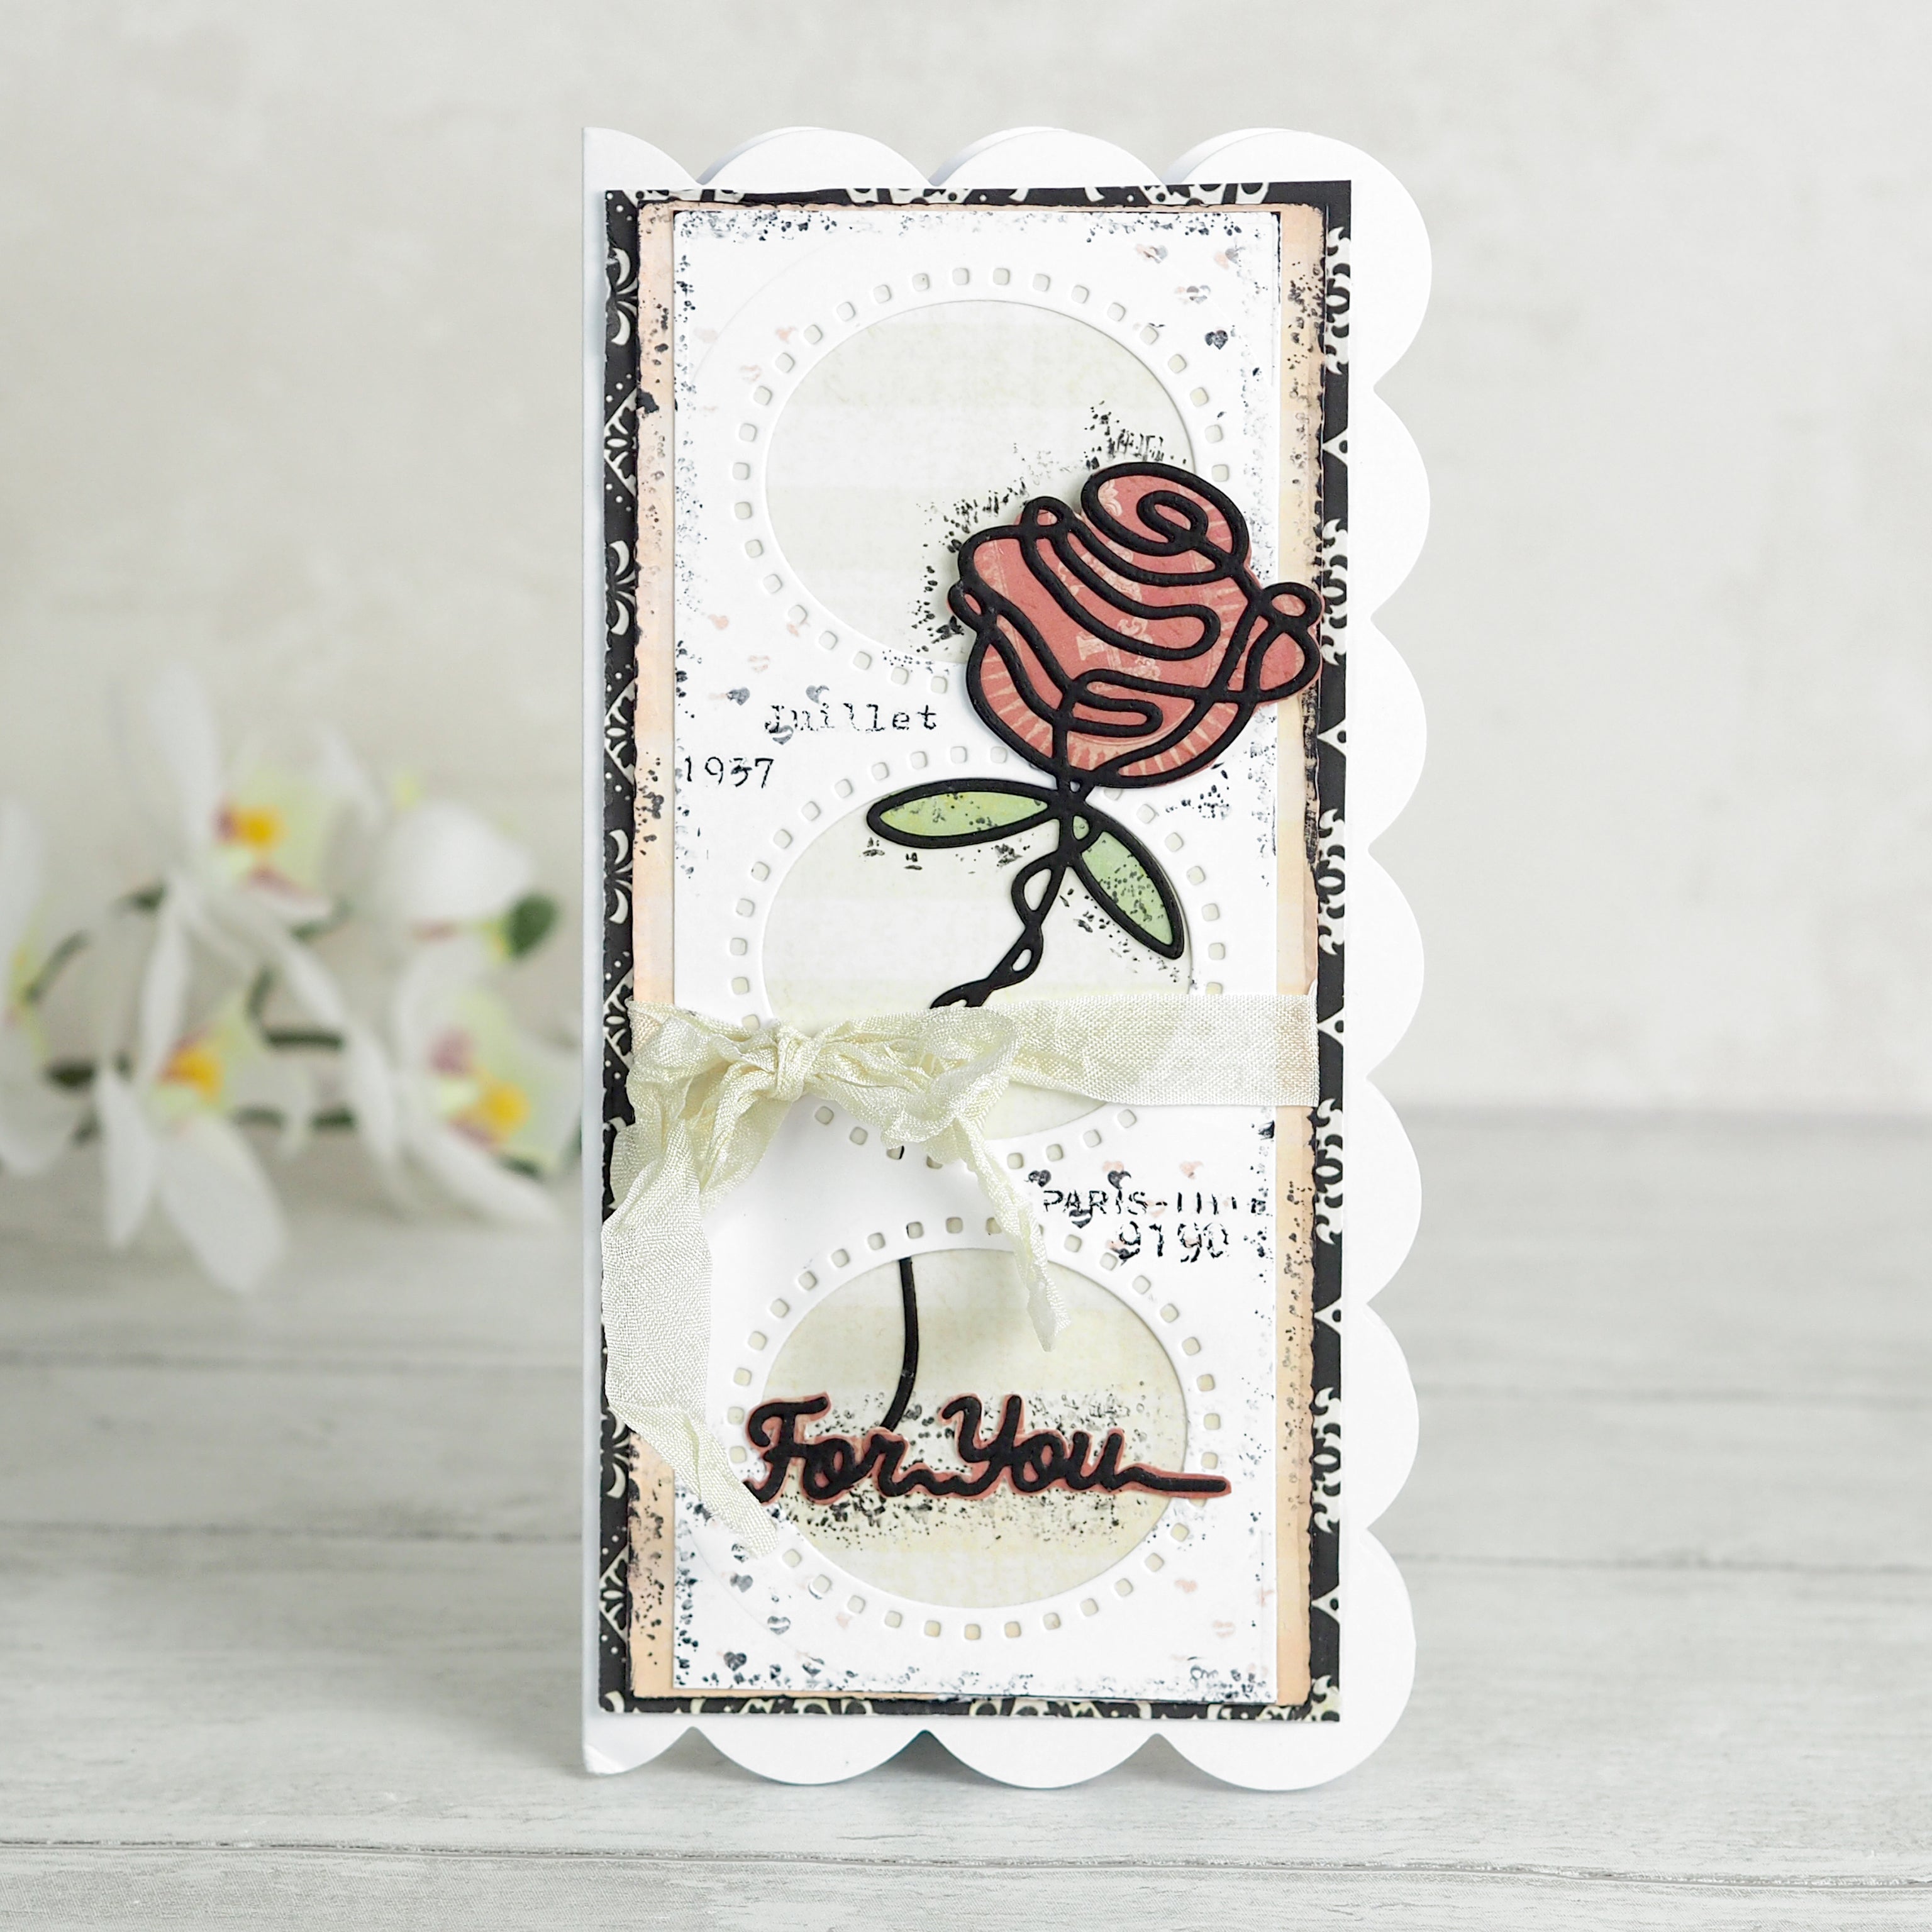 Creative Expressions One-liner Collection Just For You Craft Die